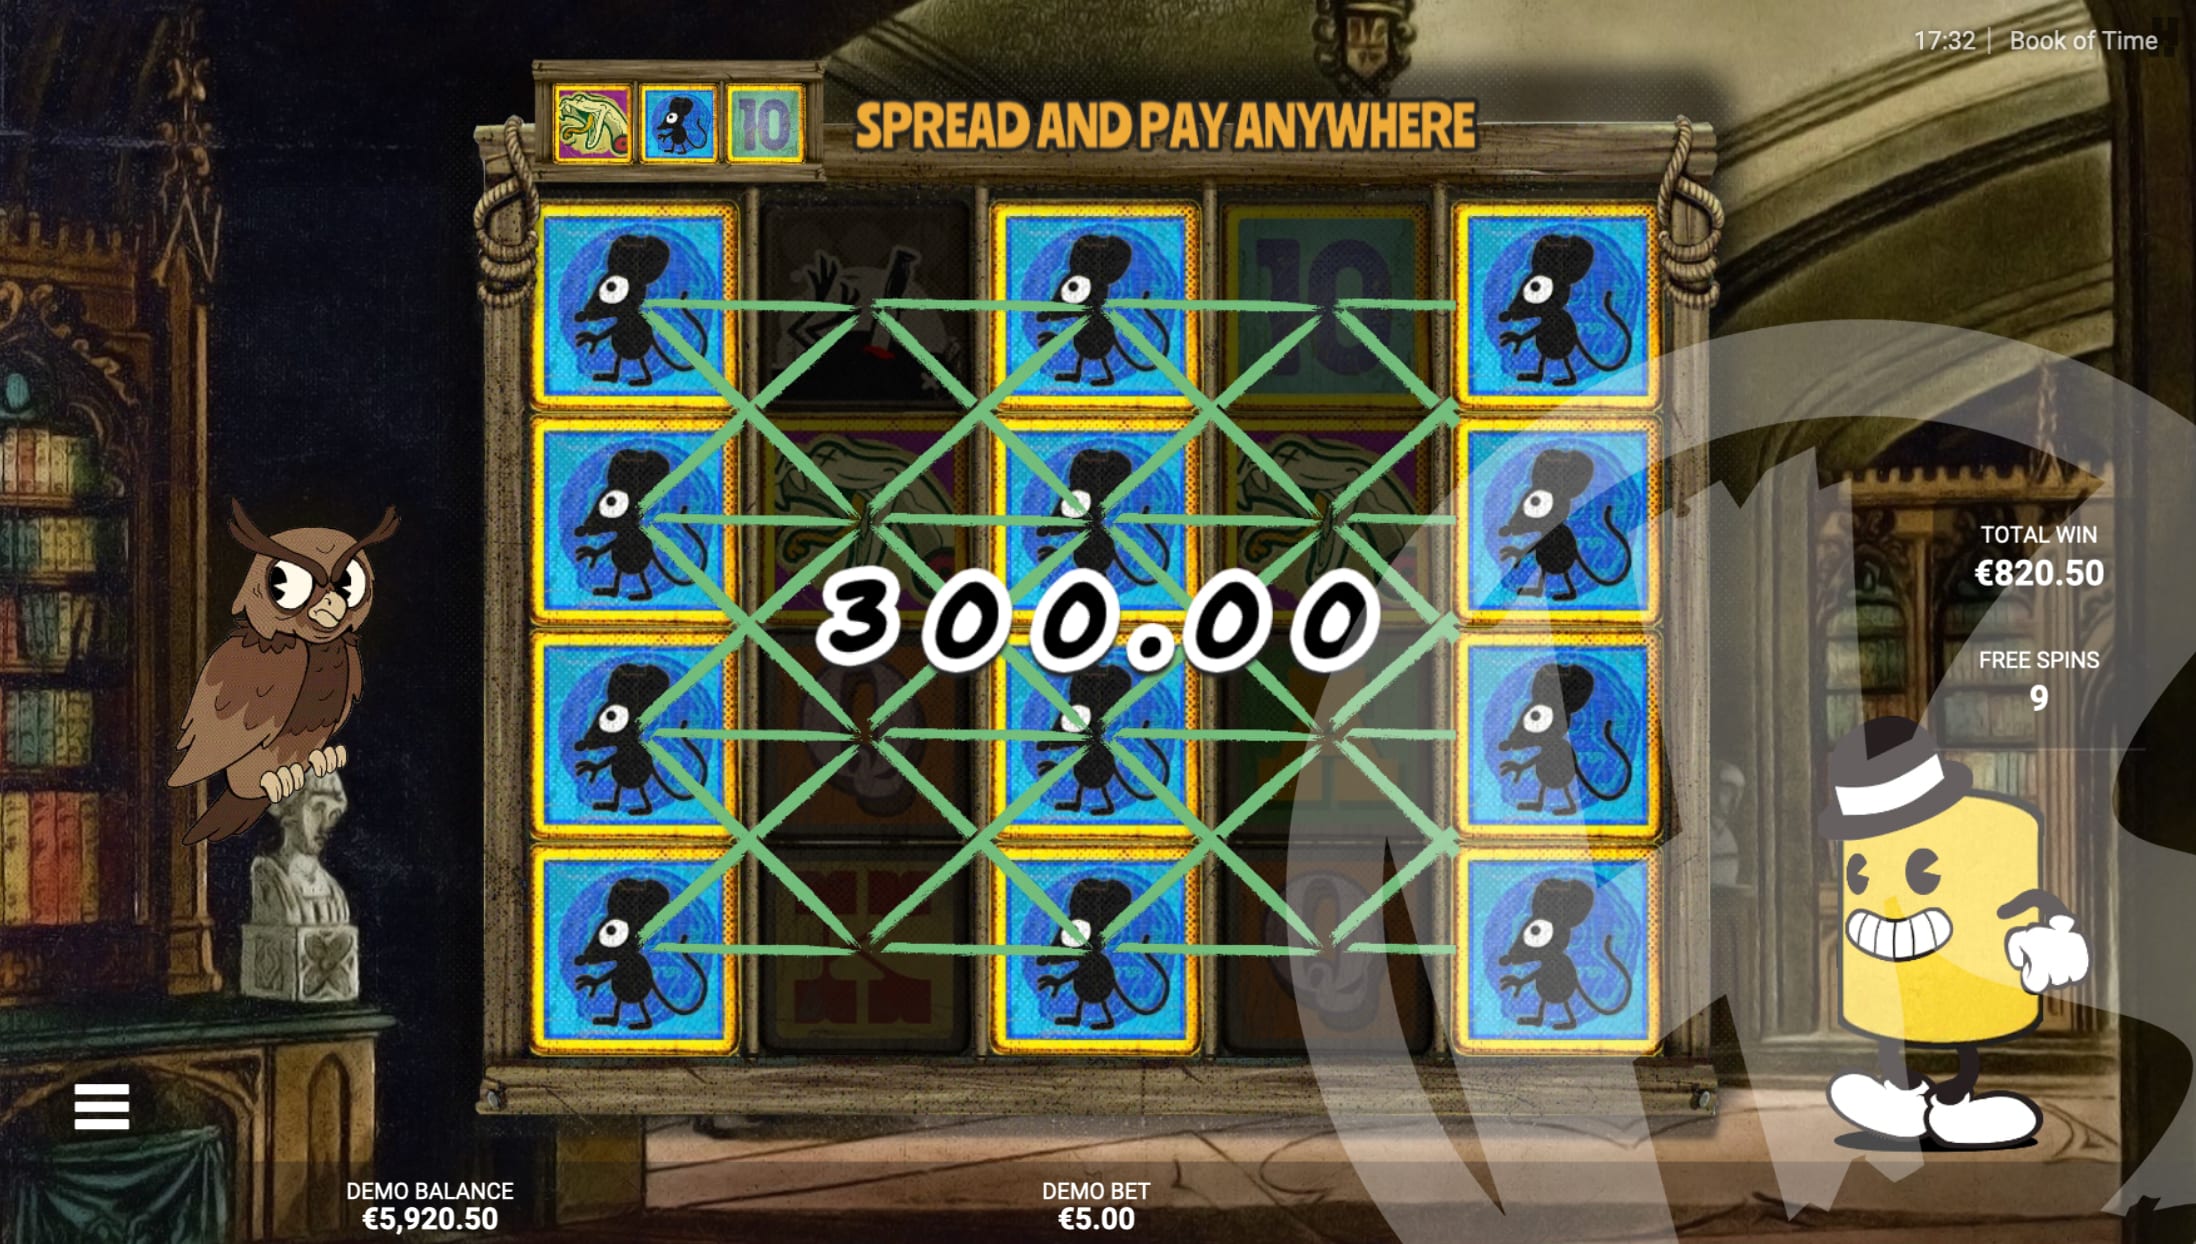 Book of Time It's a Classic! Free Spins